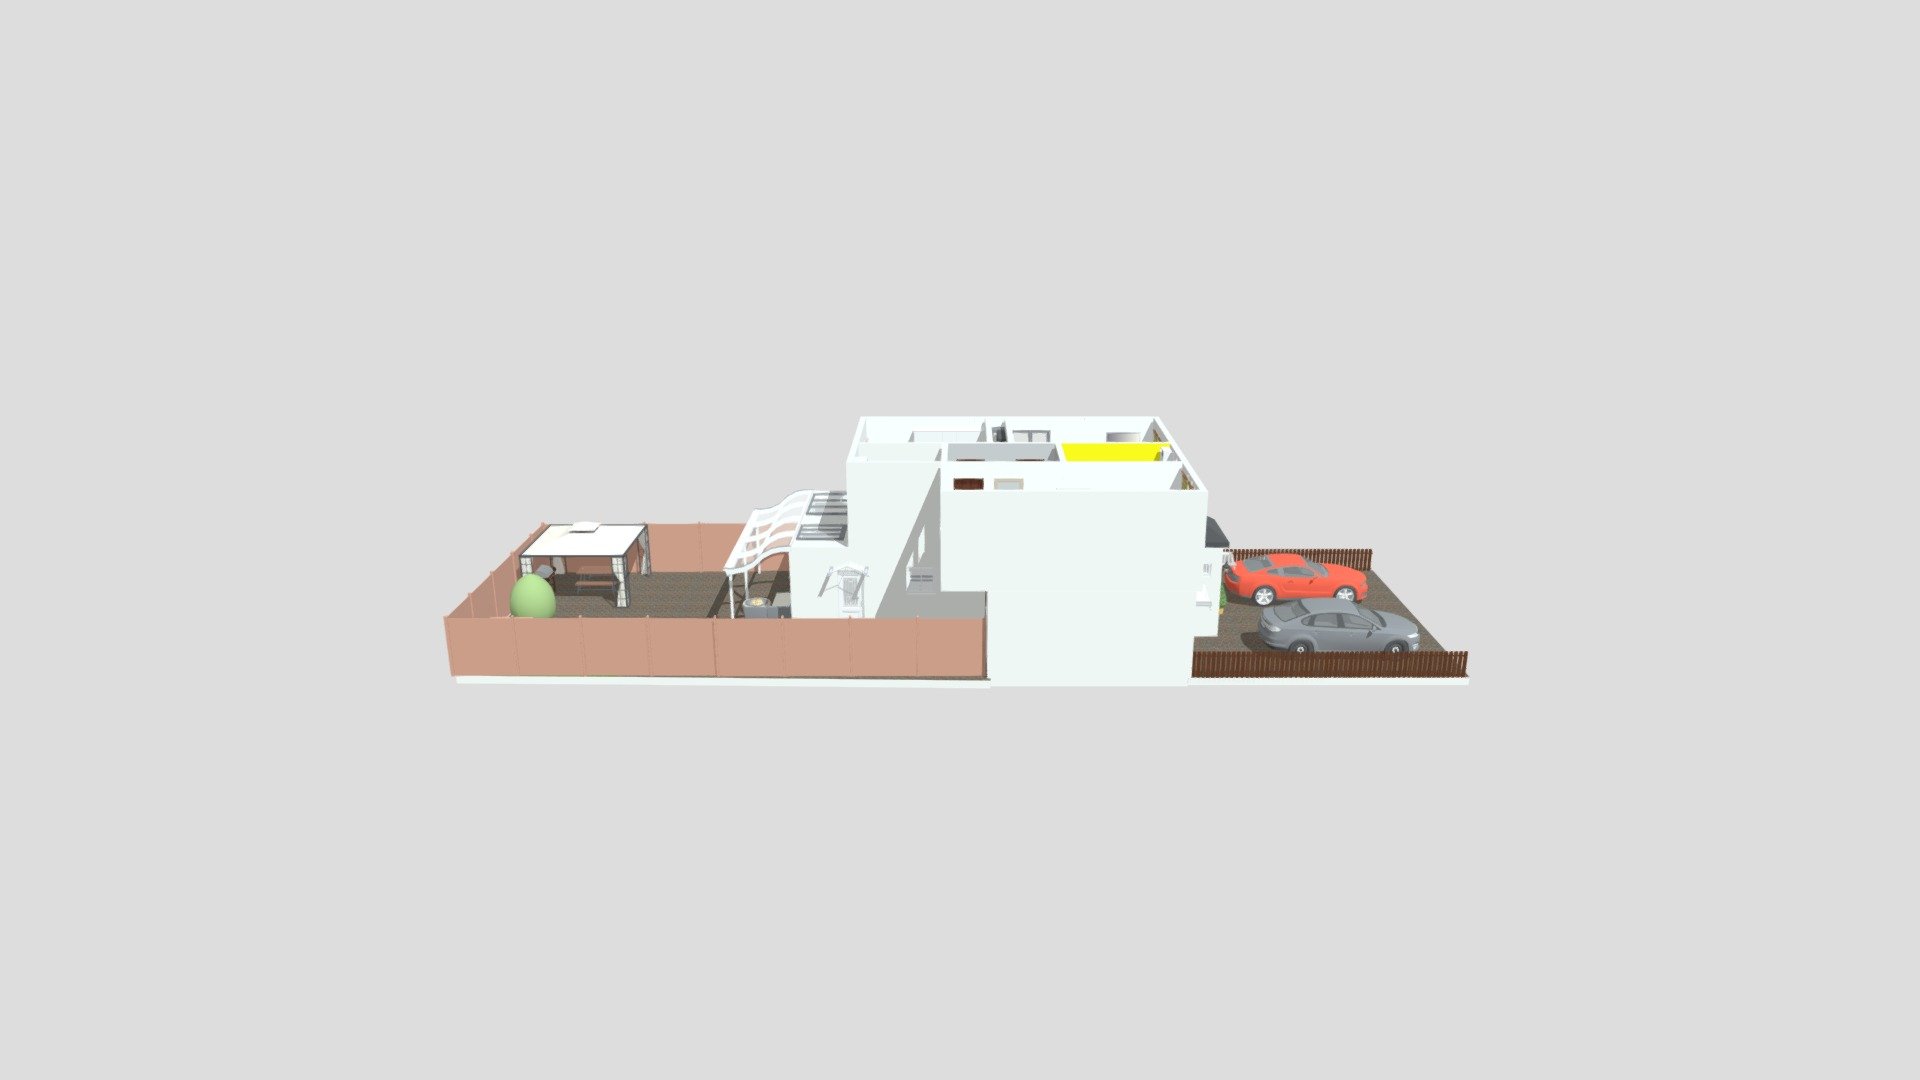 English 3 Bedroom House - Download Free 3D model by Home Design 3D